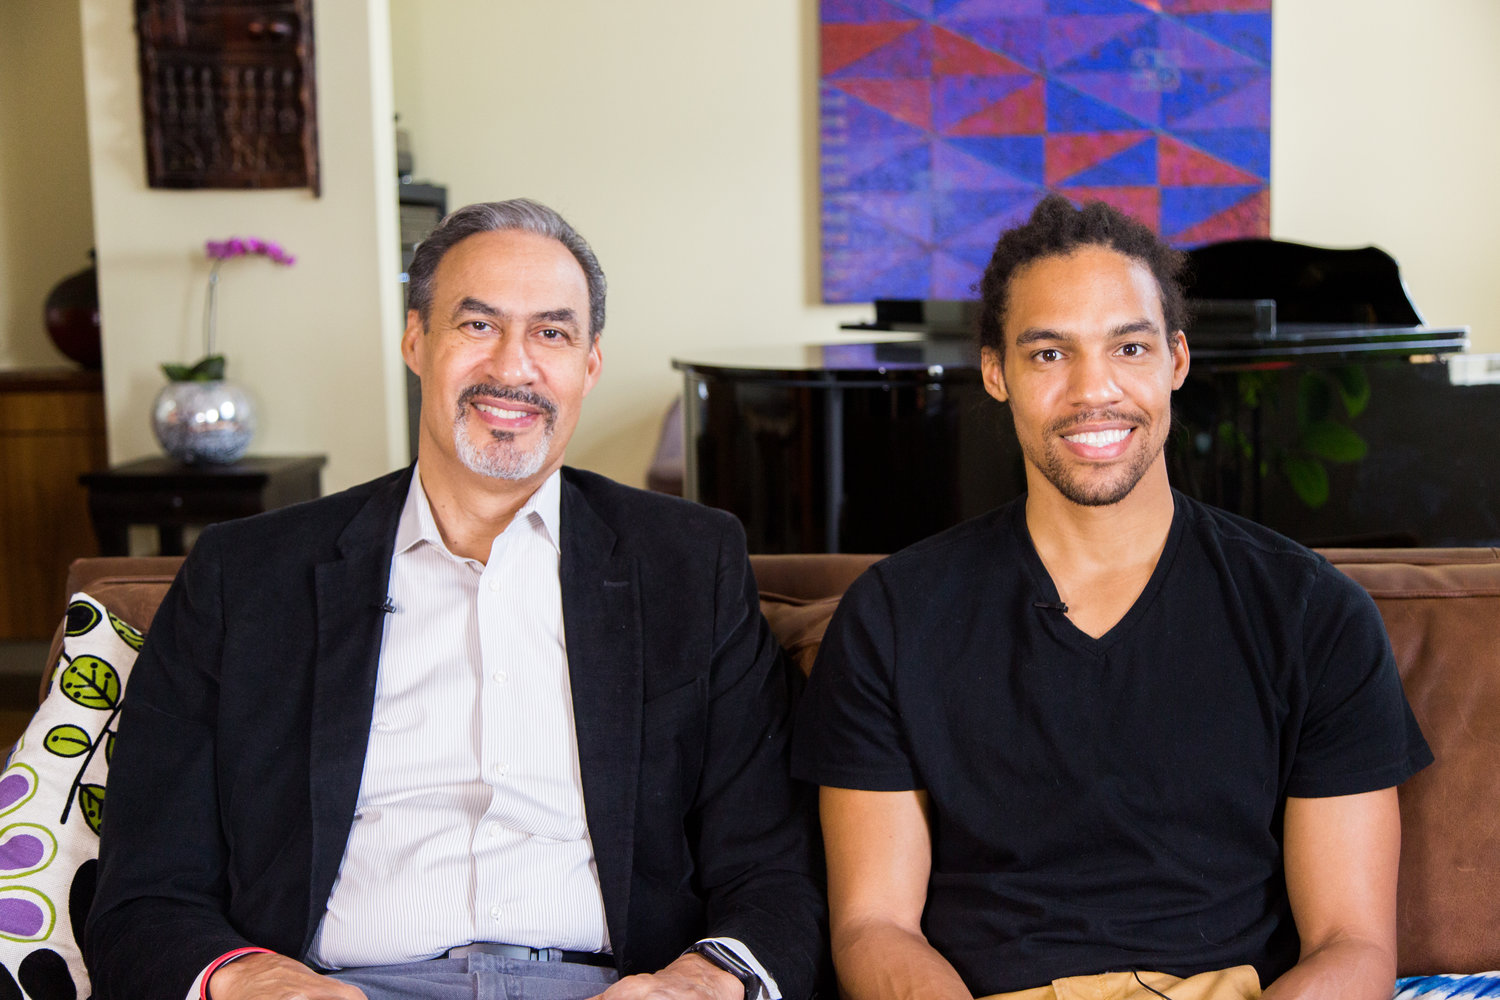 Two African American men seated next to each other, one of whom is Phil Freelon